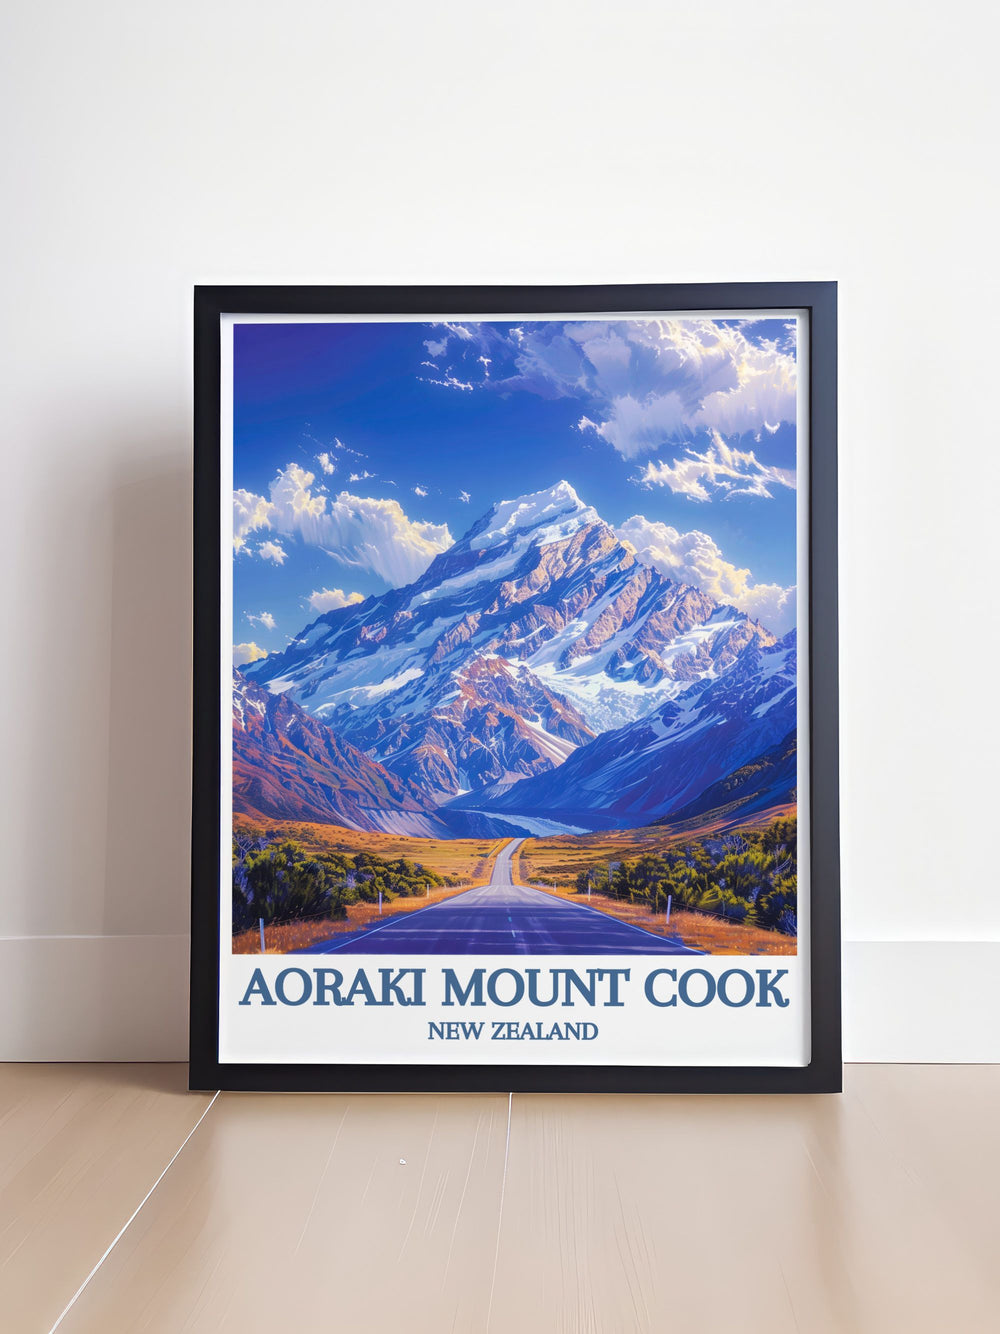 Home decor featuring serene landscapes of Mount Cook National Park, ideal for creating a peaceful atmosphere in any room.